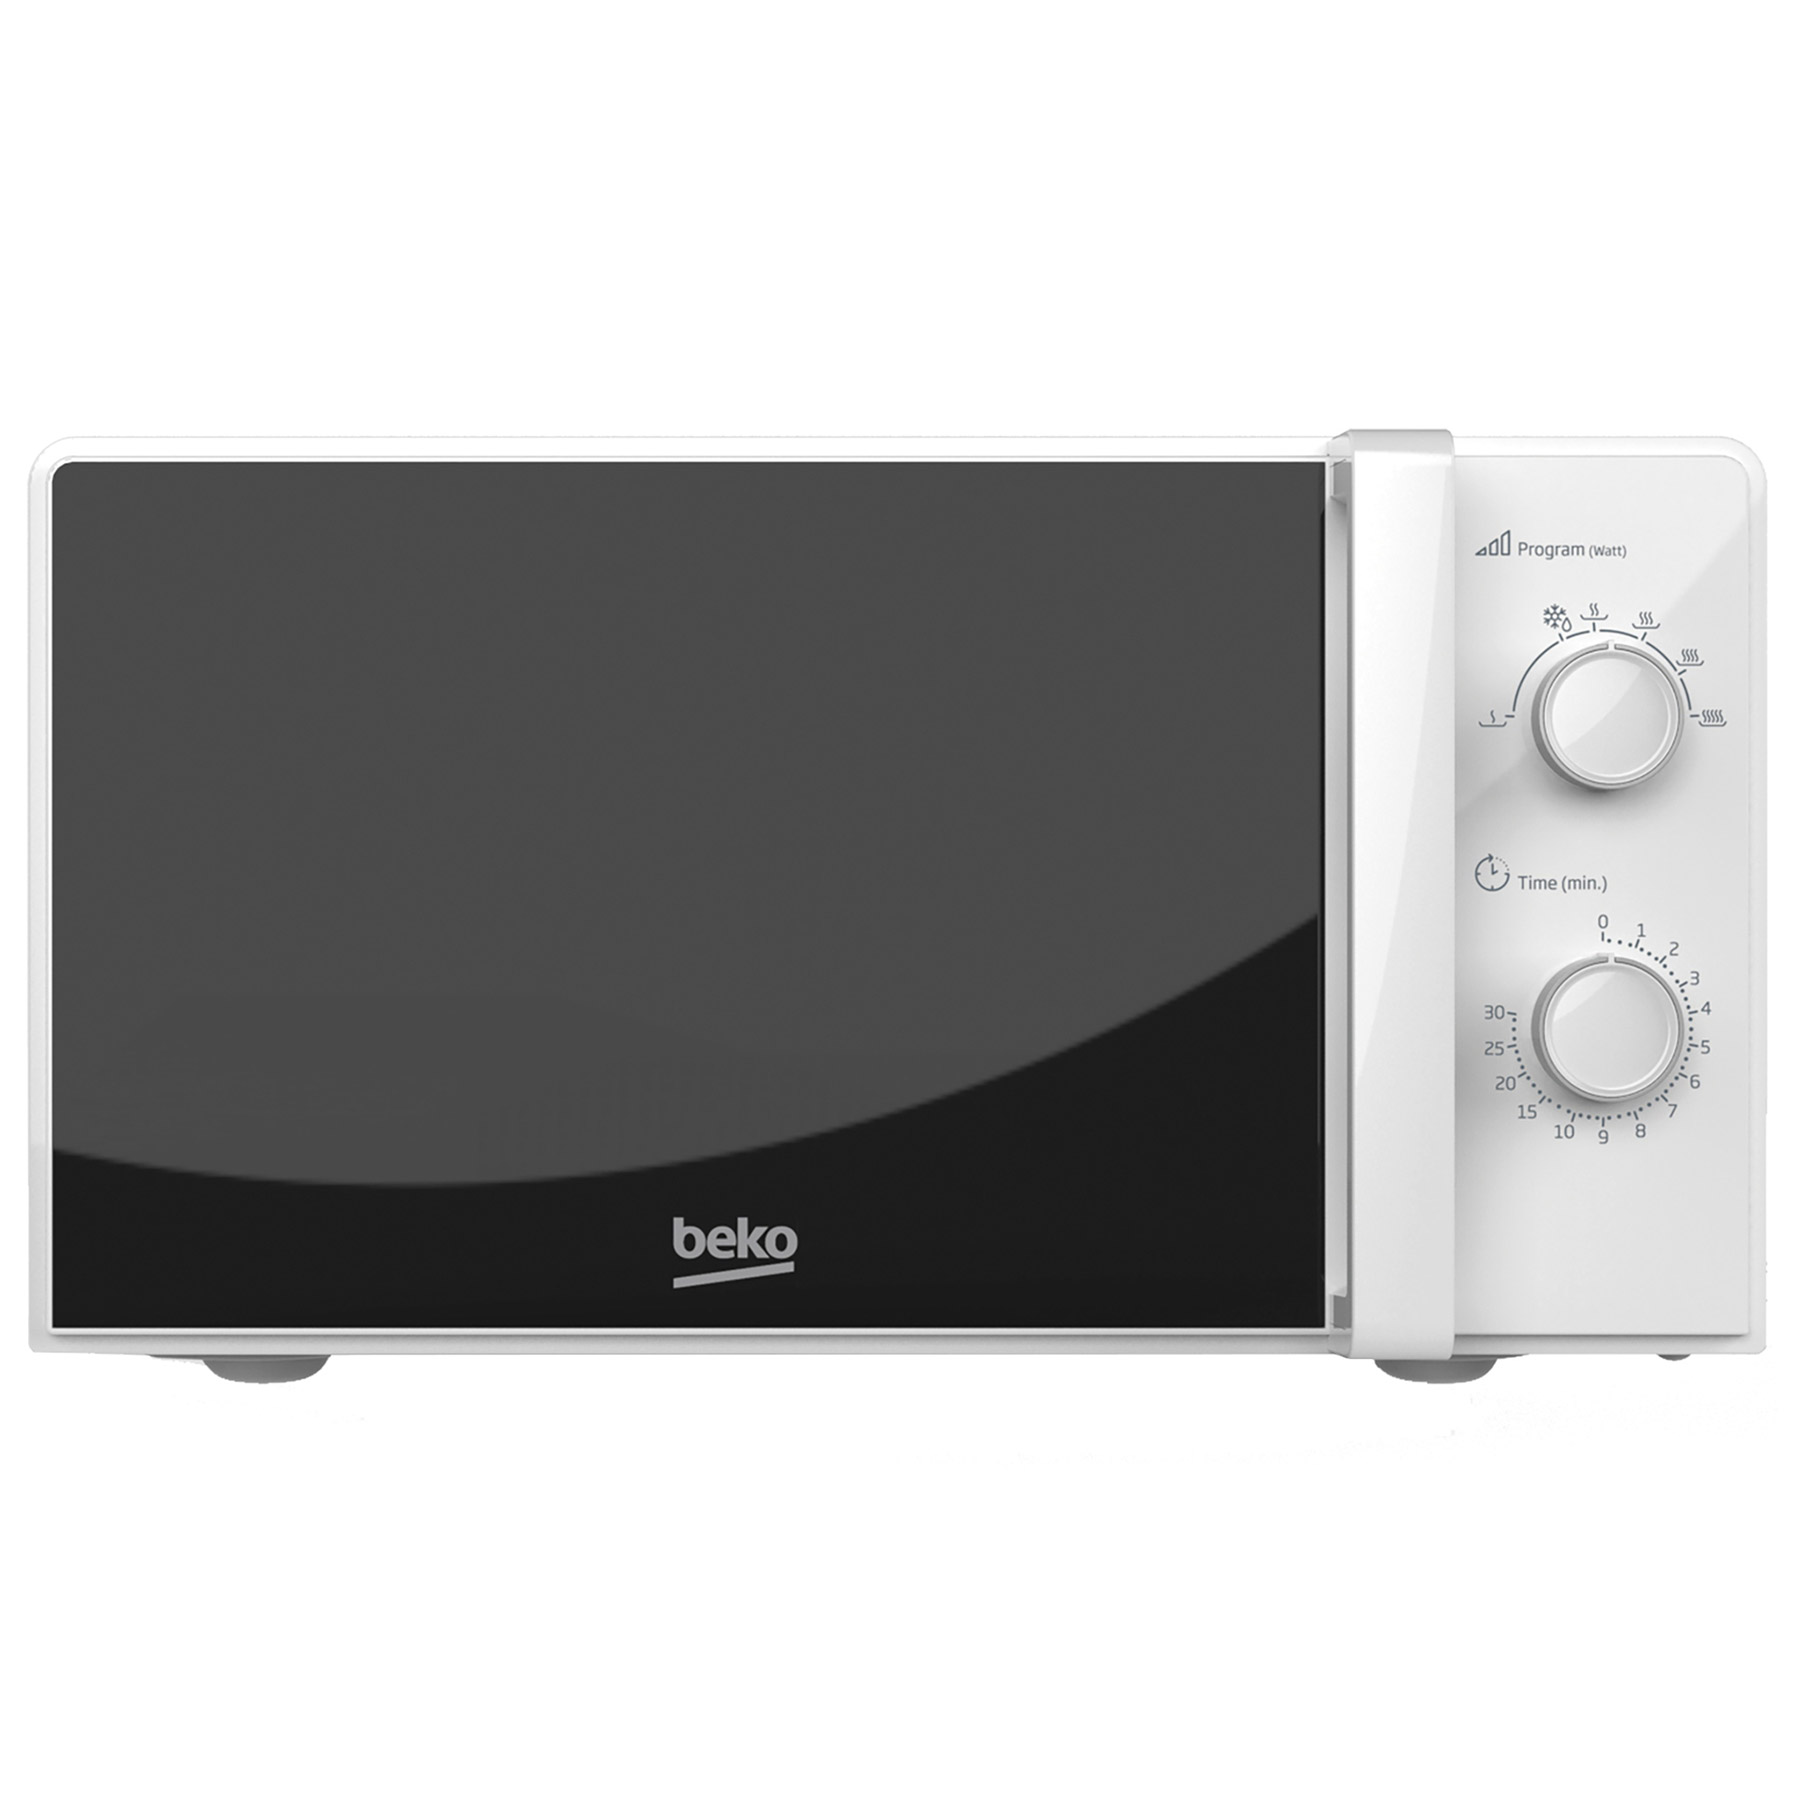 Beko MOC20100WFB Microwave Oven in White 20L 700W Manual Control